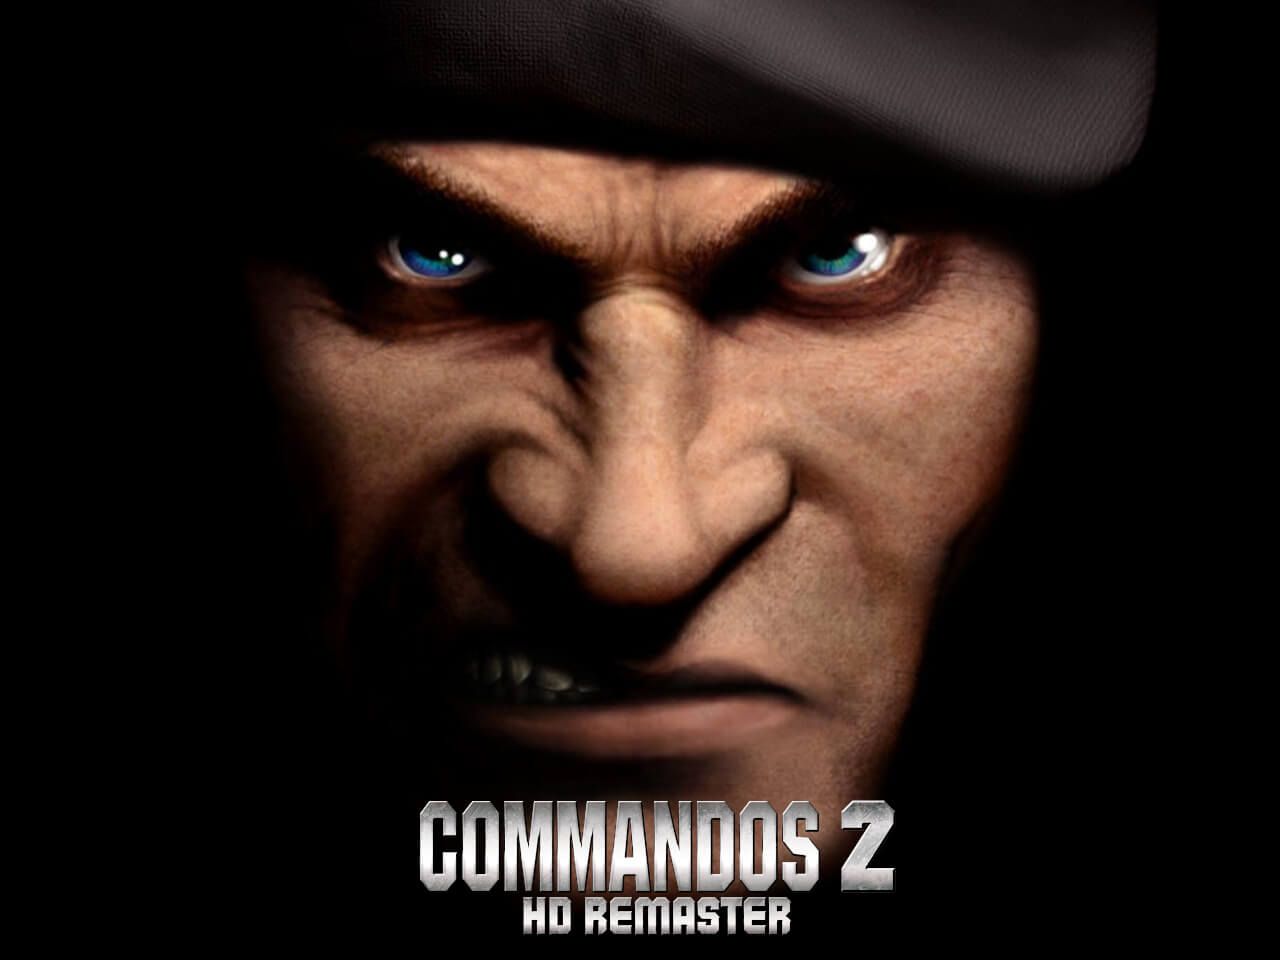 download the new version for ipod Commandos 3 - HD Remaster | DEMO